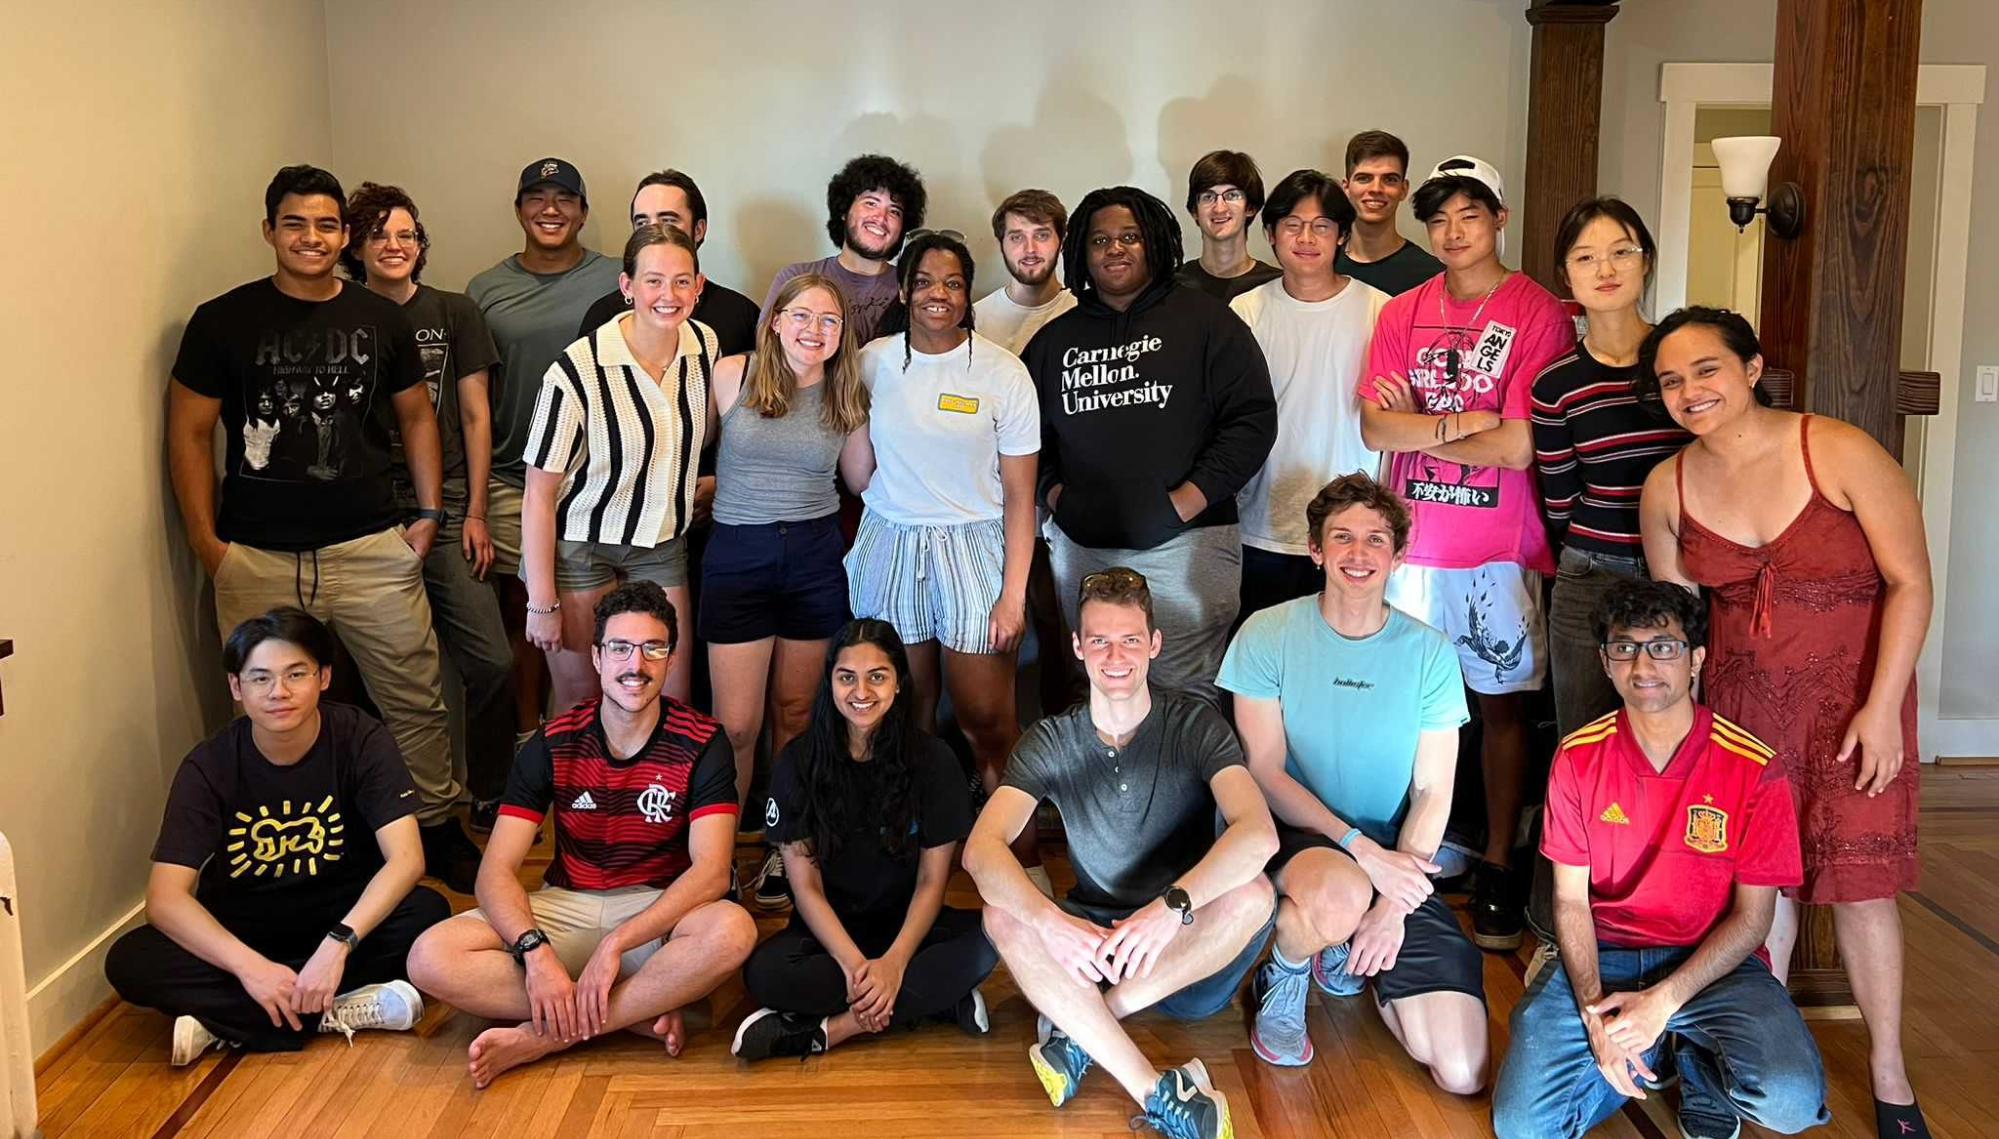 Twenty-one students casually posed together in a Pittsburgh home